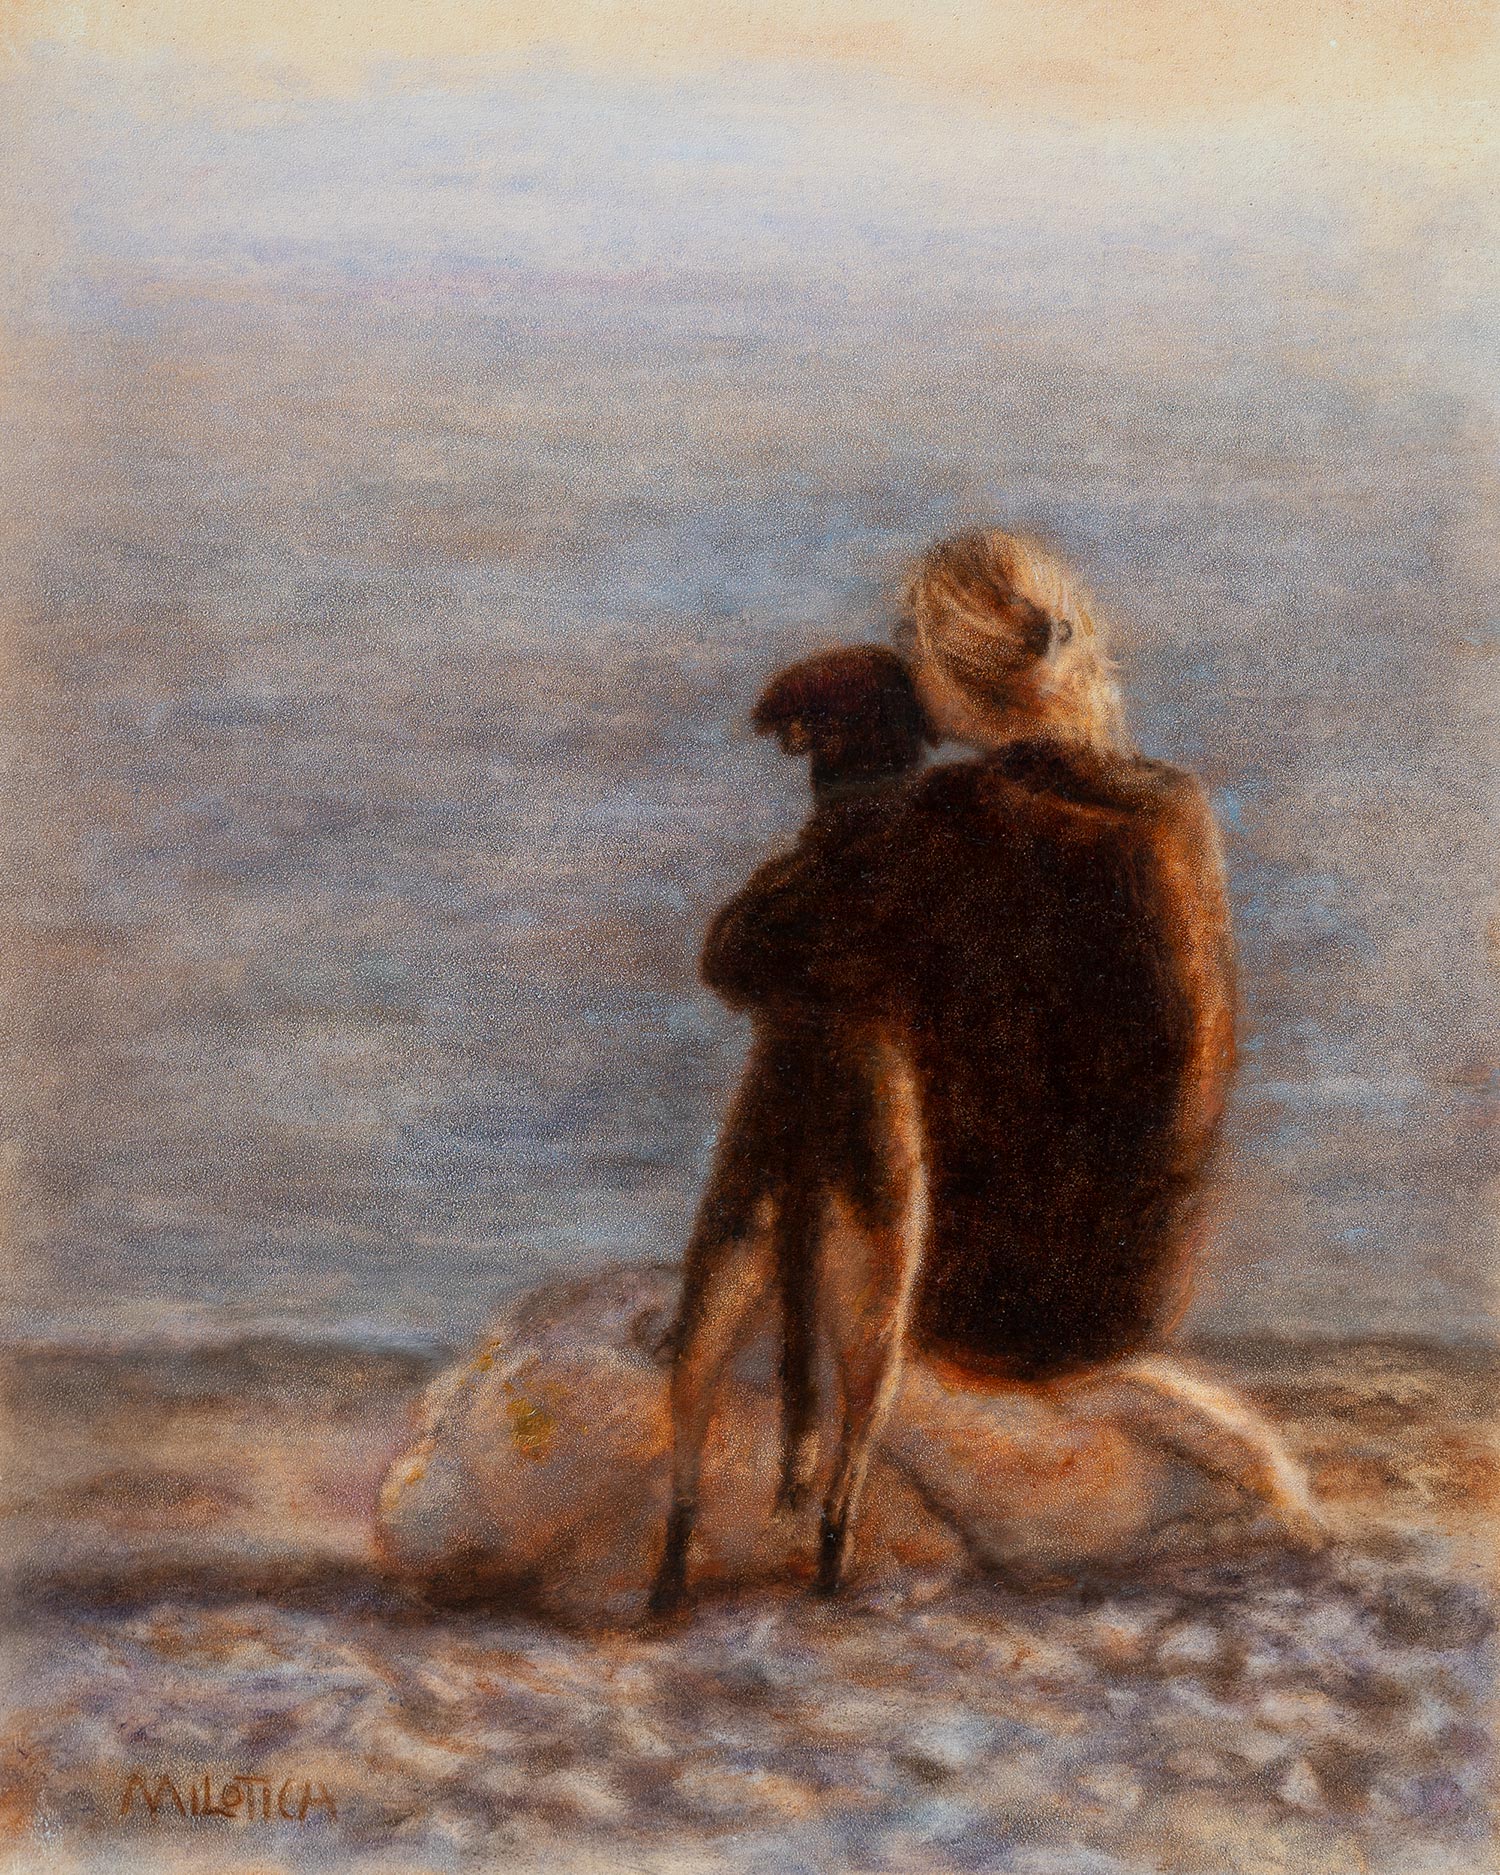 Woman with Dog, an original oil painting by Ute Milotich